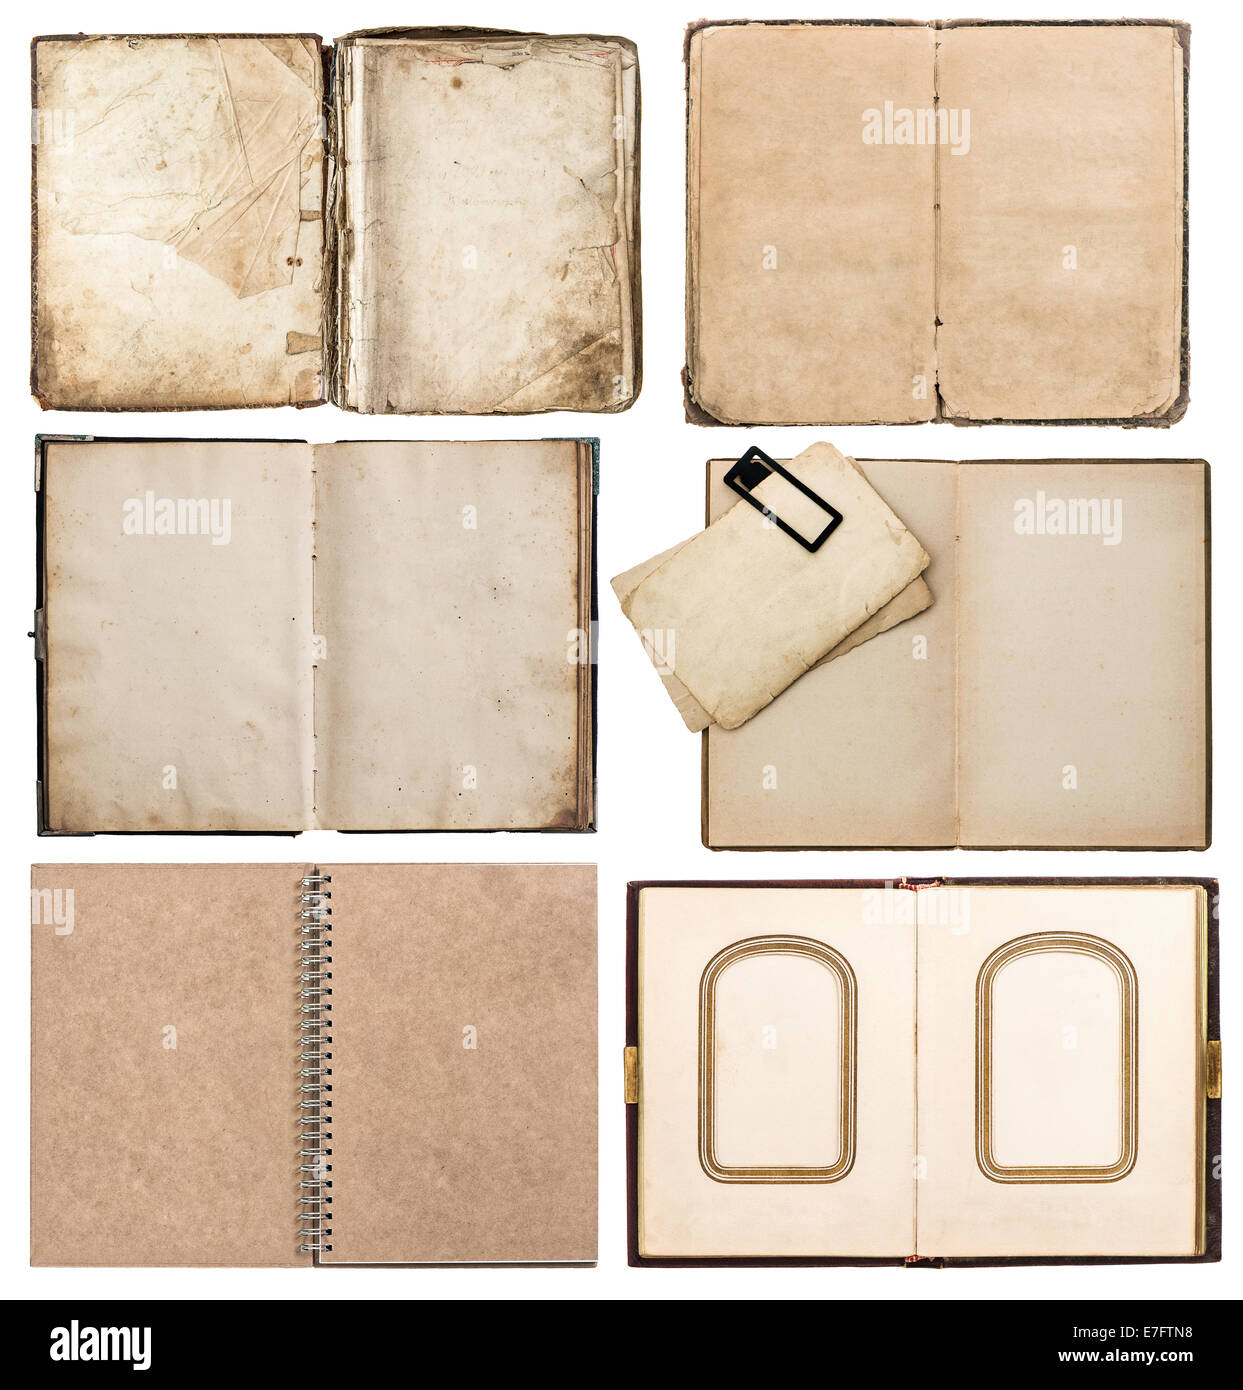 old books with aged paper pages isolated on white background Stock Photo